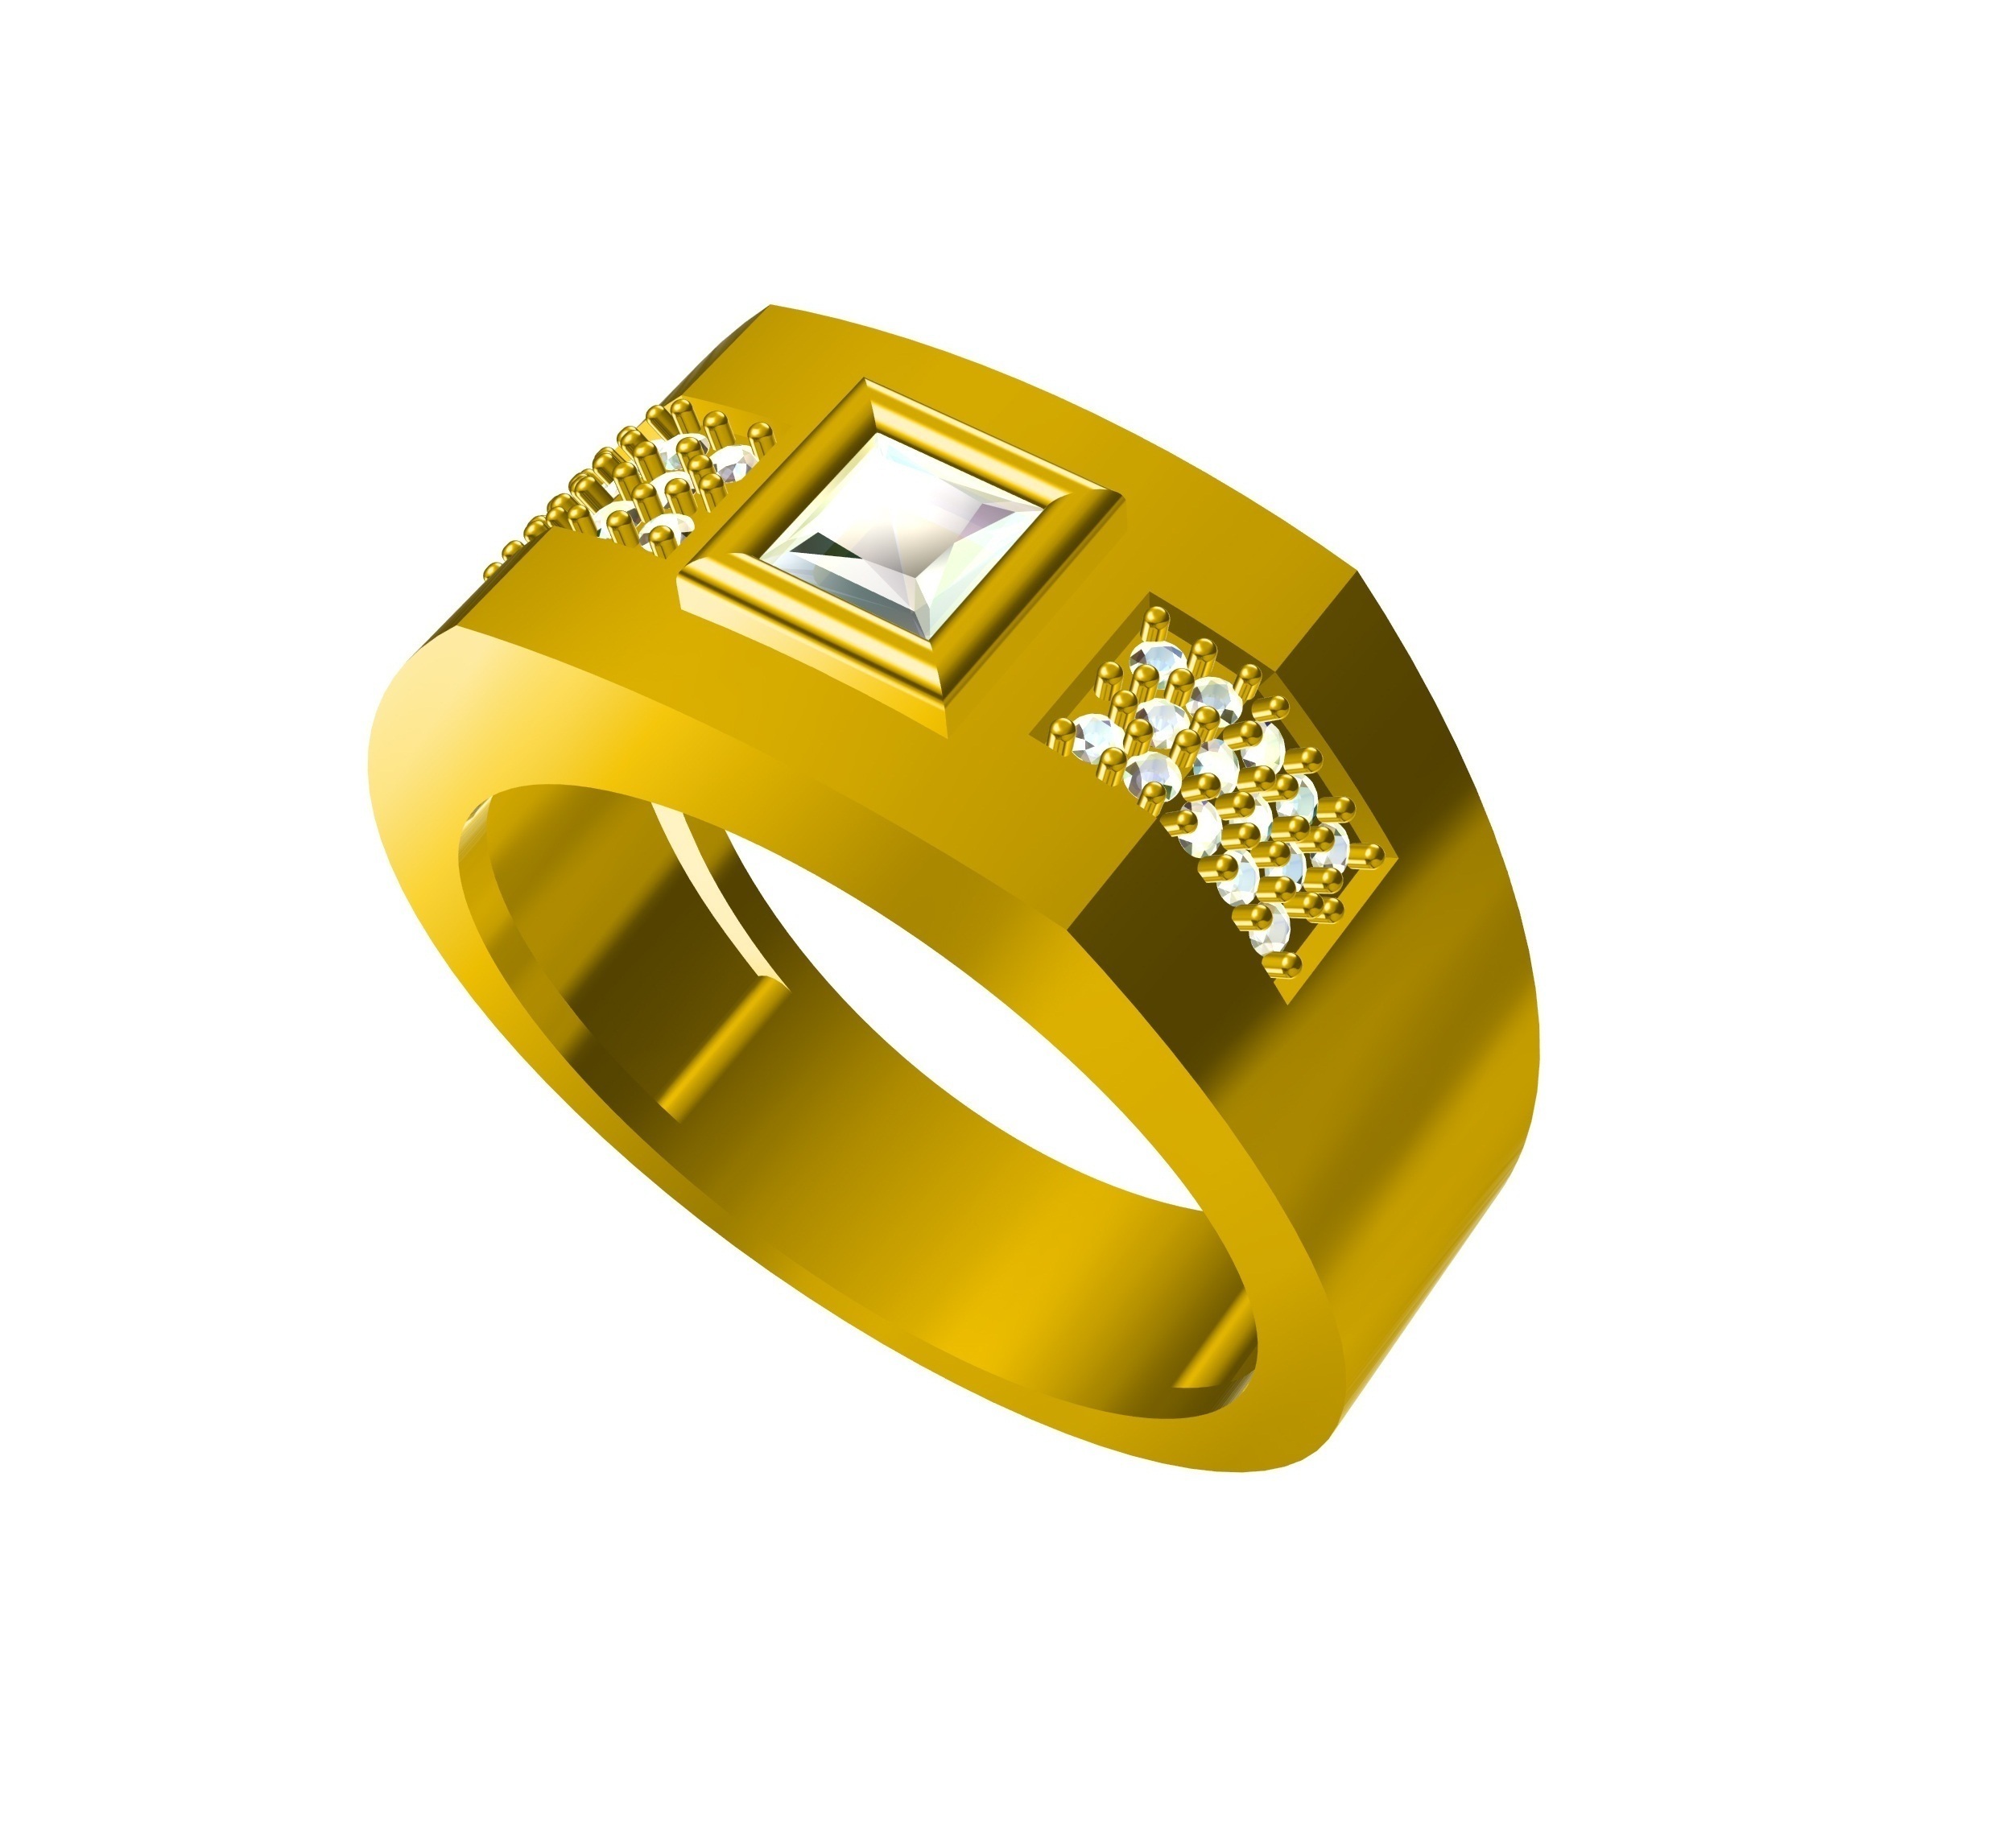 Using CAD to Design a Bespoke Engagement Ring